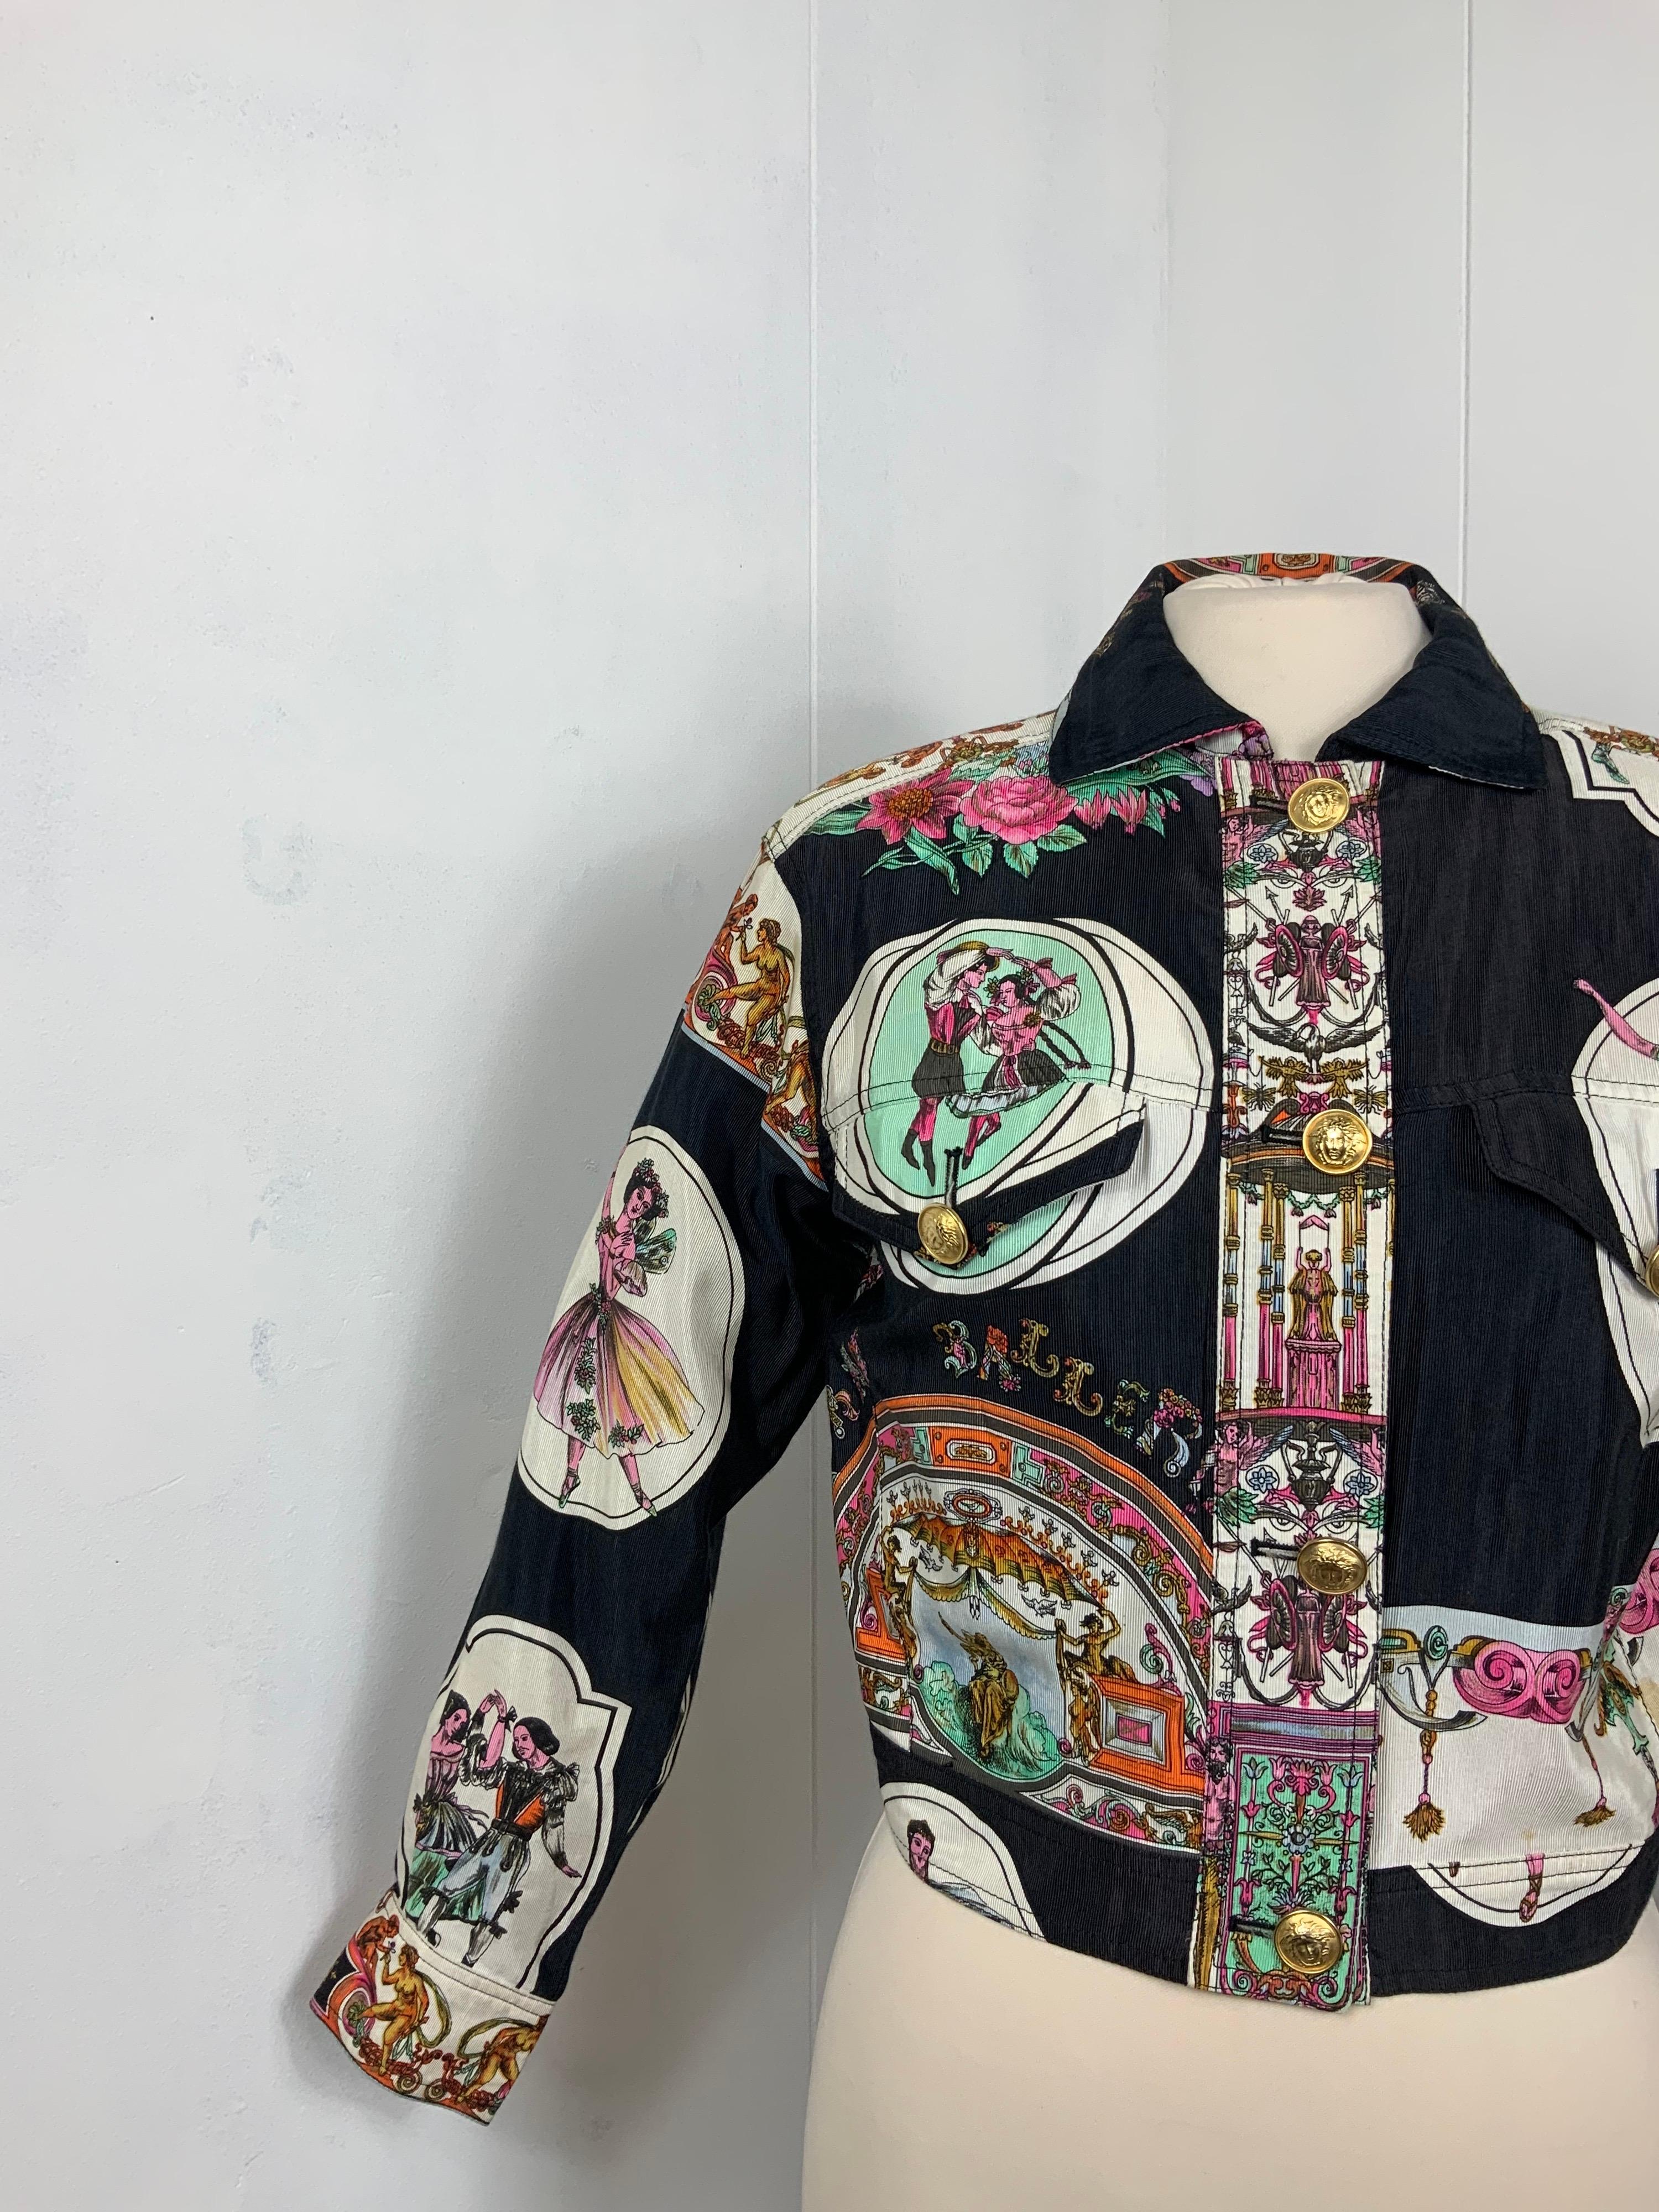 Gianni Versace Jacket.
From iconic Spring 92 collection. 
Ballet theme.
Featuring padded shoulder & golden buttons.
Size & compositions tag are missing. 
It fits an Italian 40.
Measurements: 
Shoulders 42 cm
Bust 42 cm 
Length 50 cm
Sleeves 55